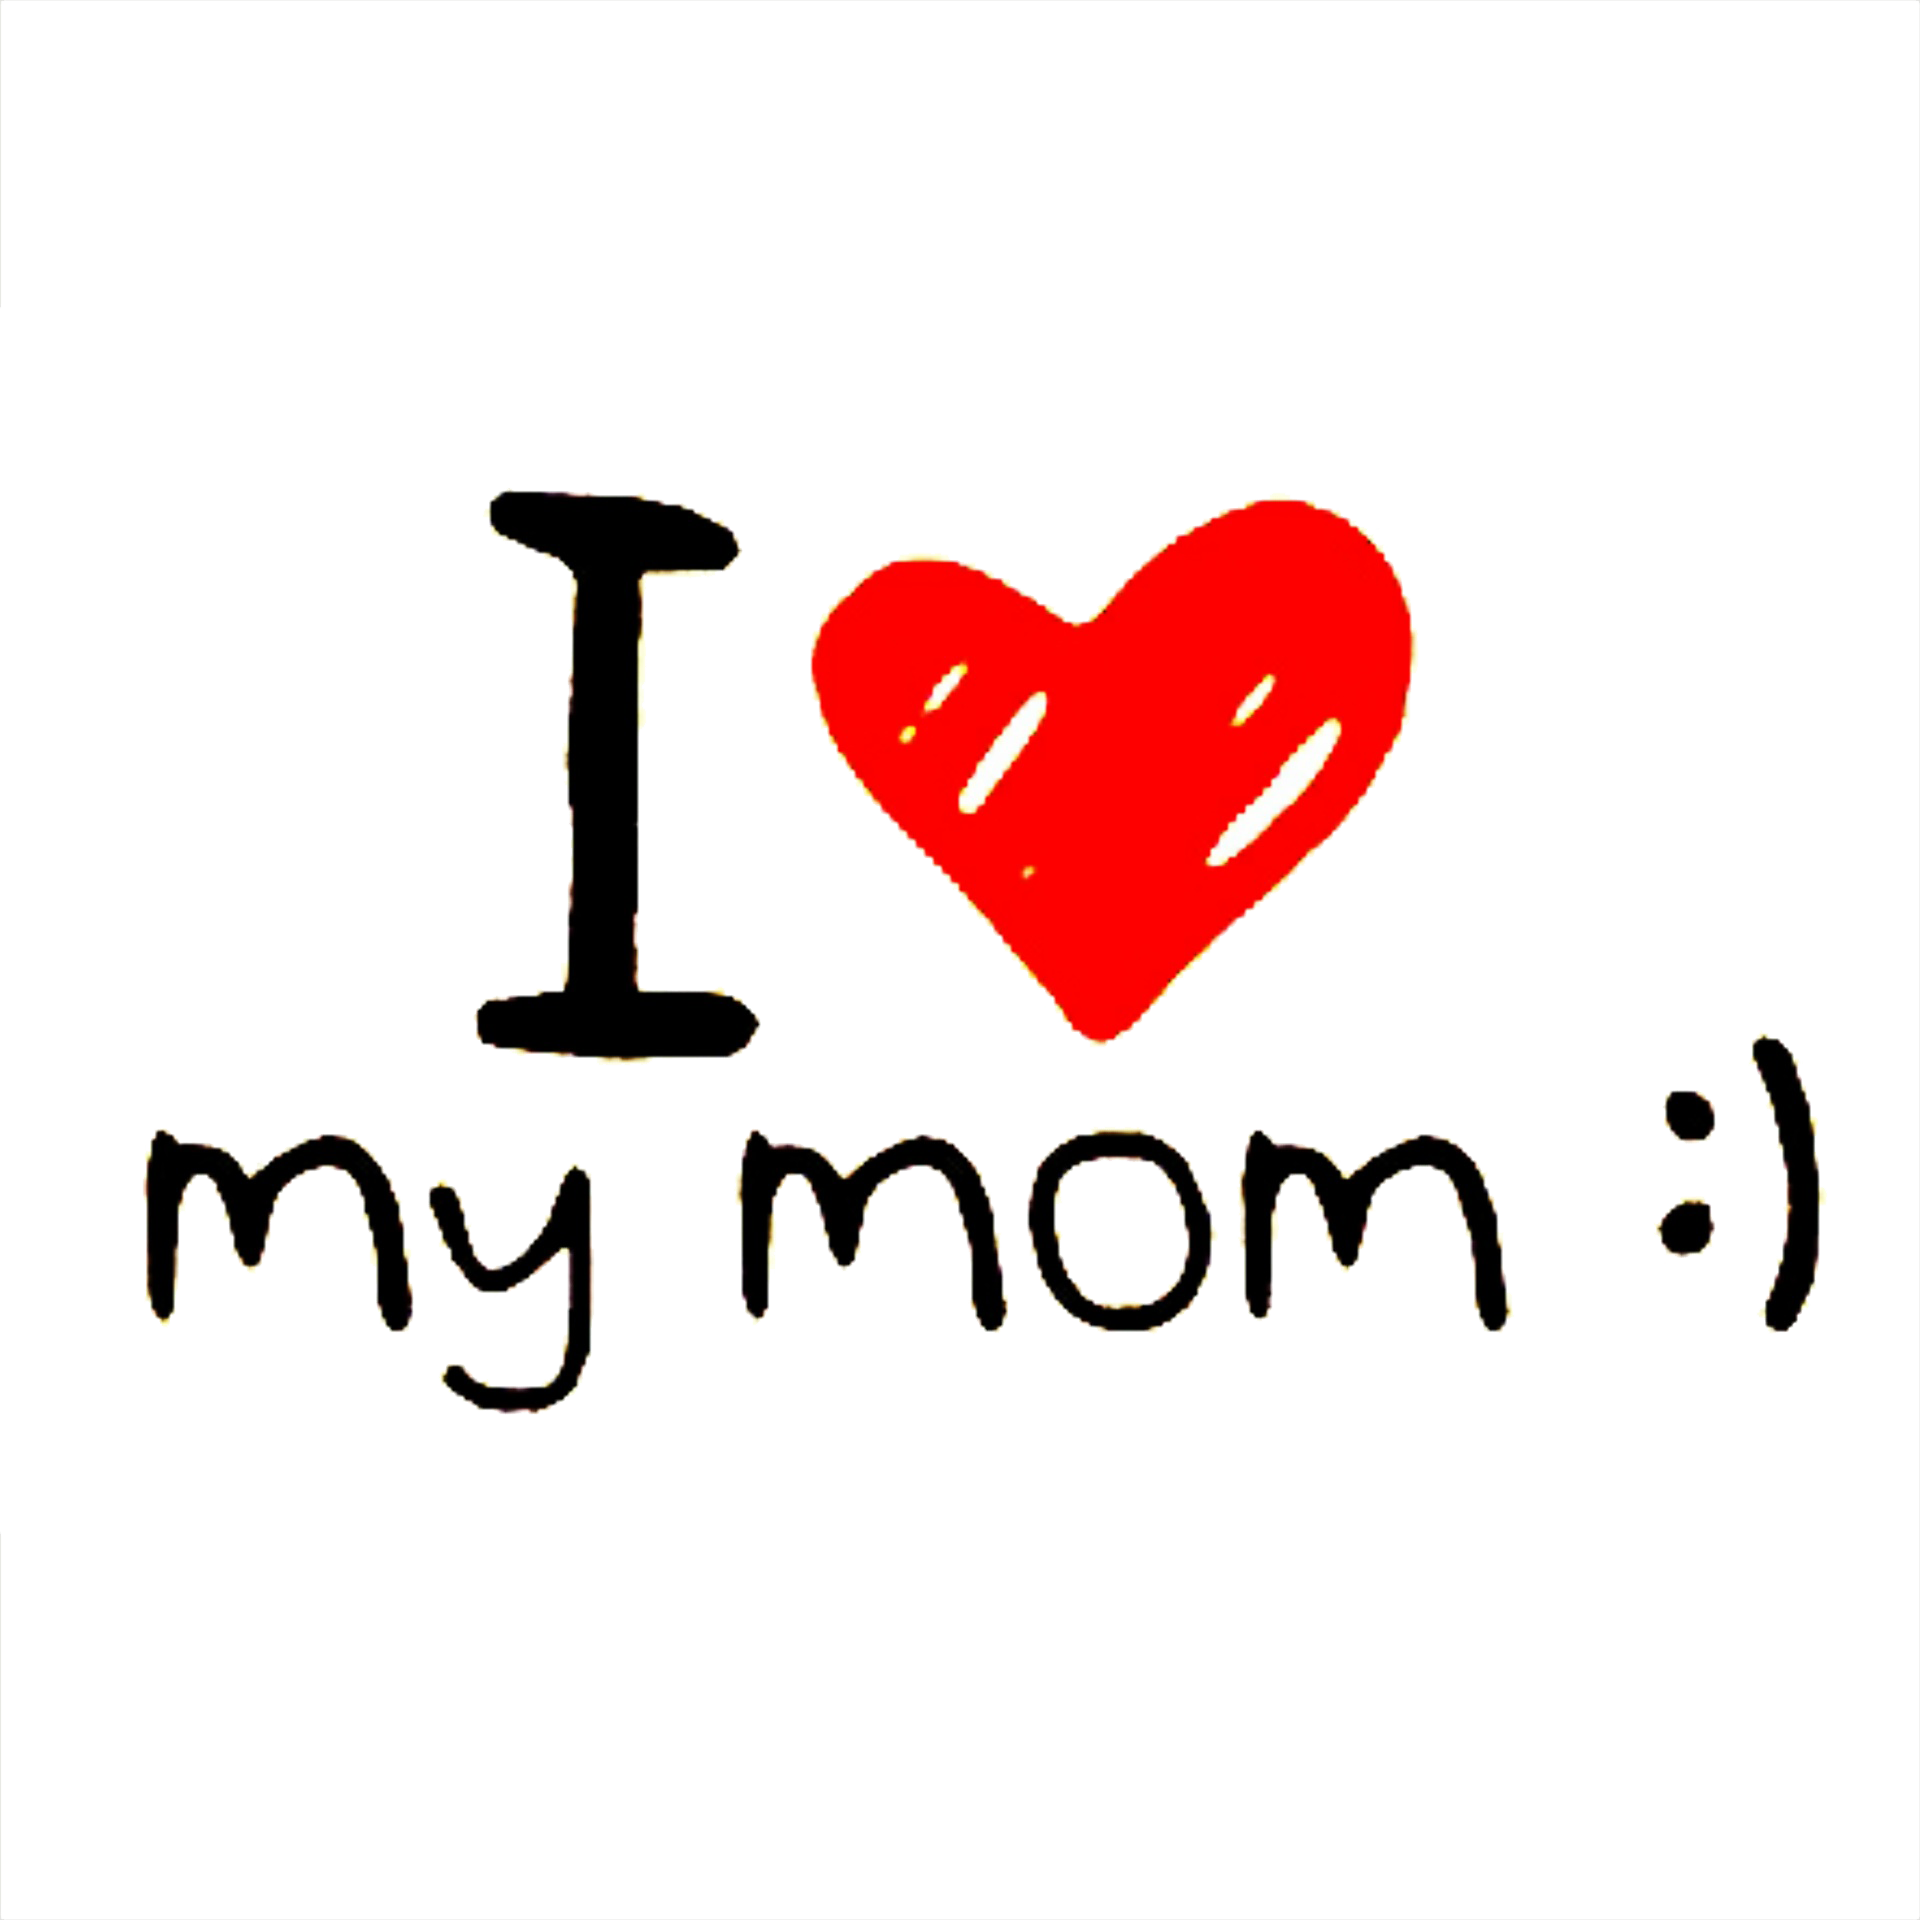 I Love You Mom Download Free PNG